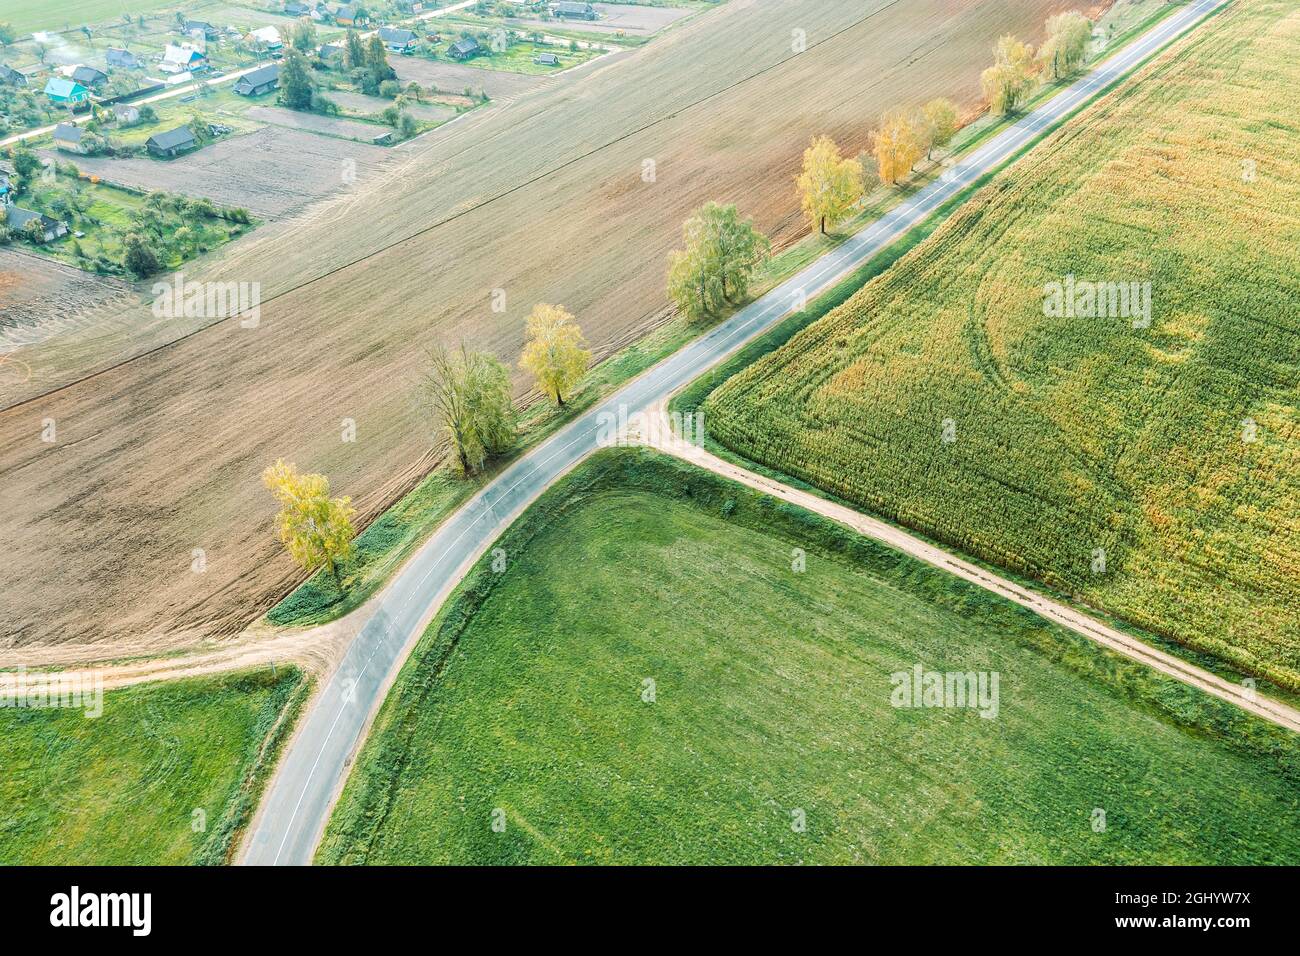 country road intersection with dirt roads between agricultural fields. autumn sunny landscape. drone photo. Stock Photo